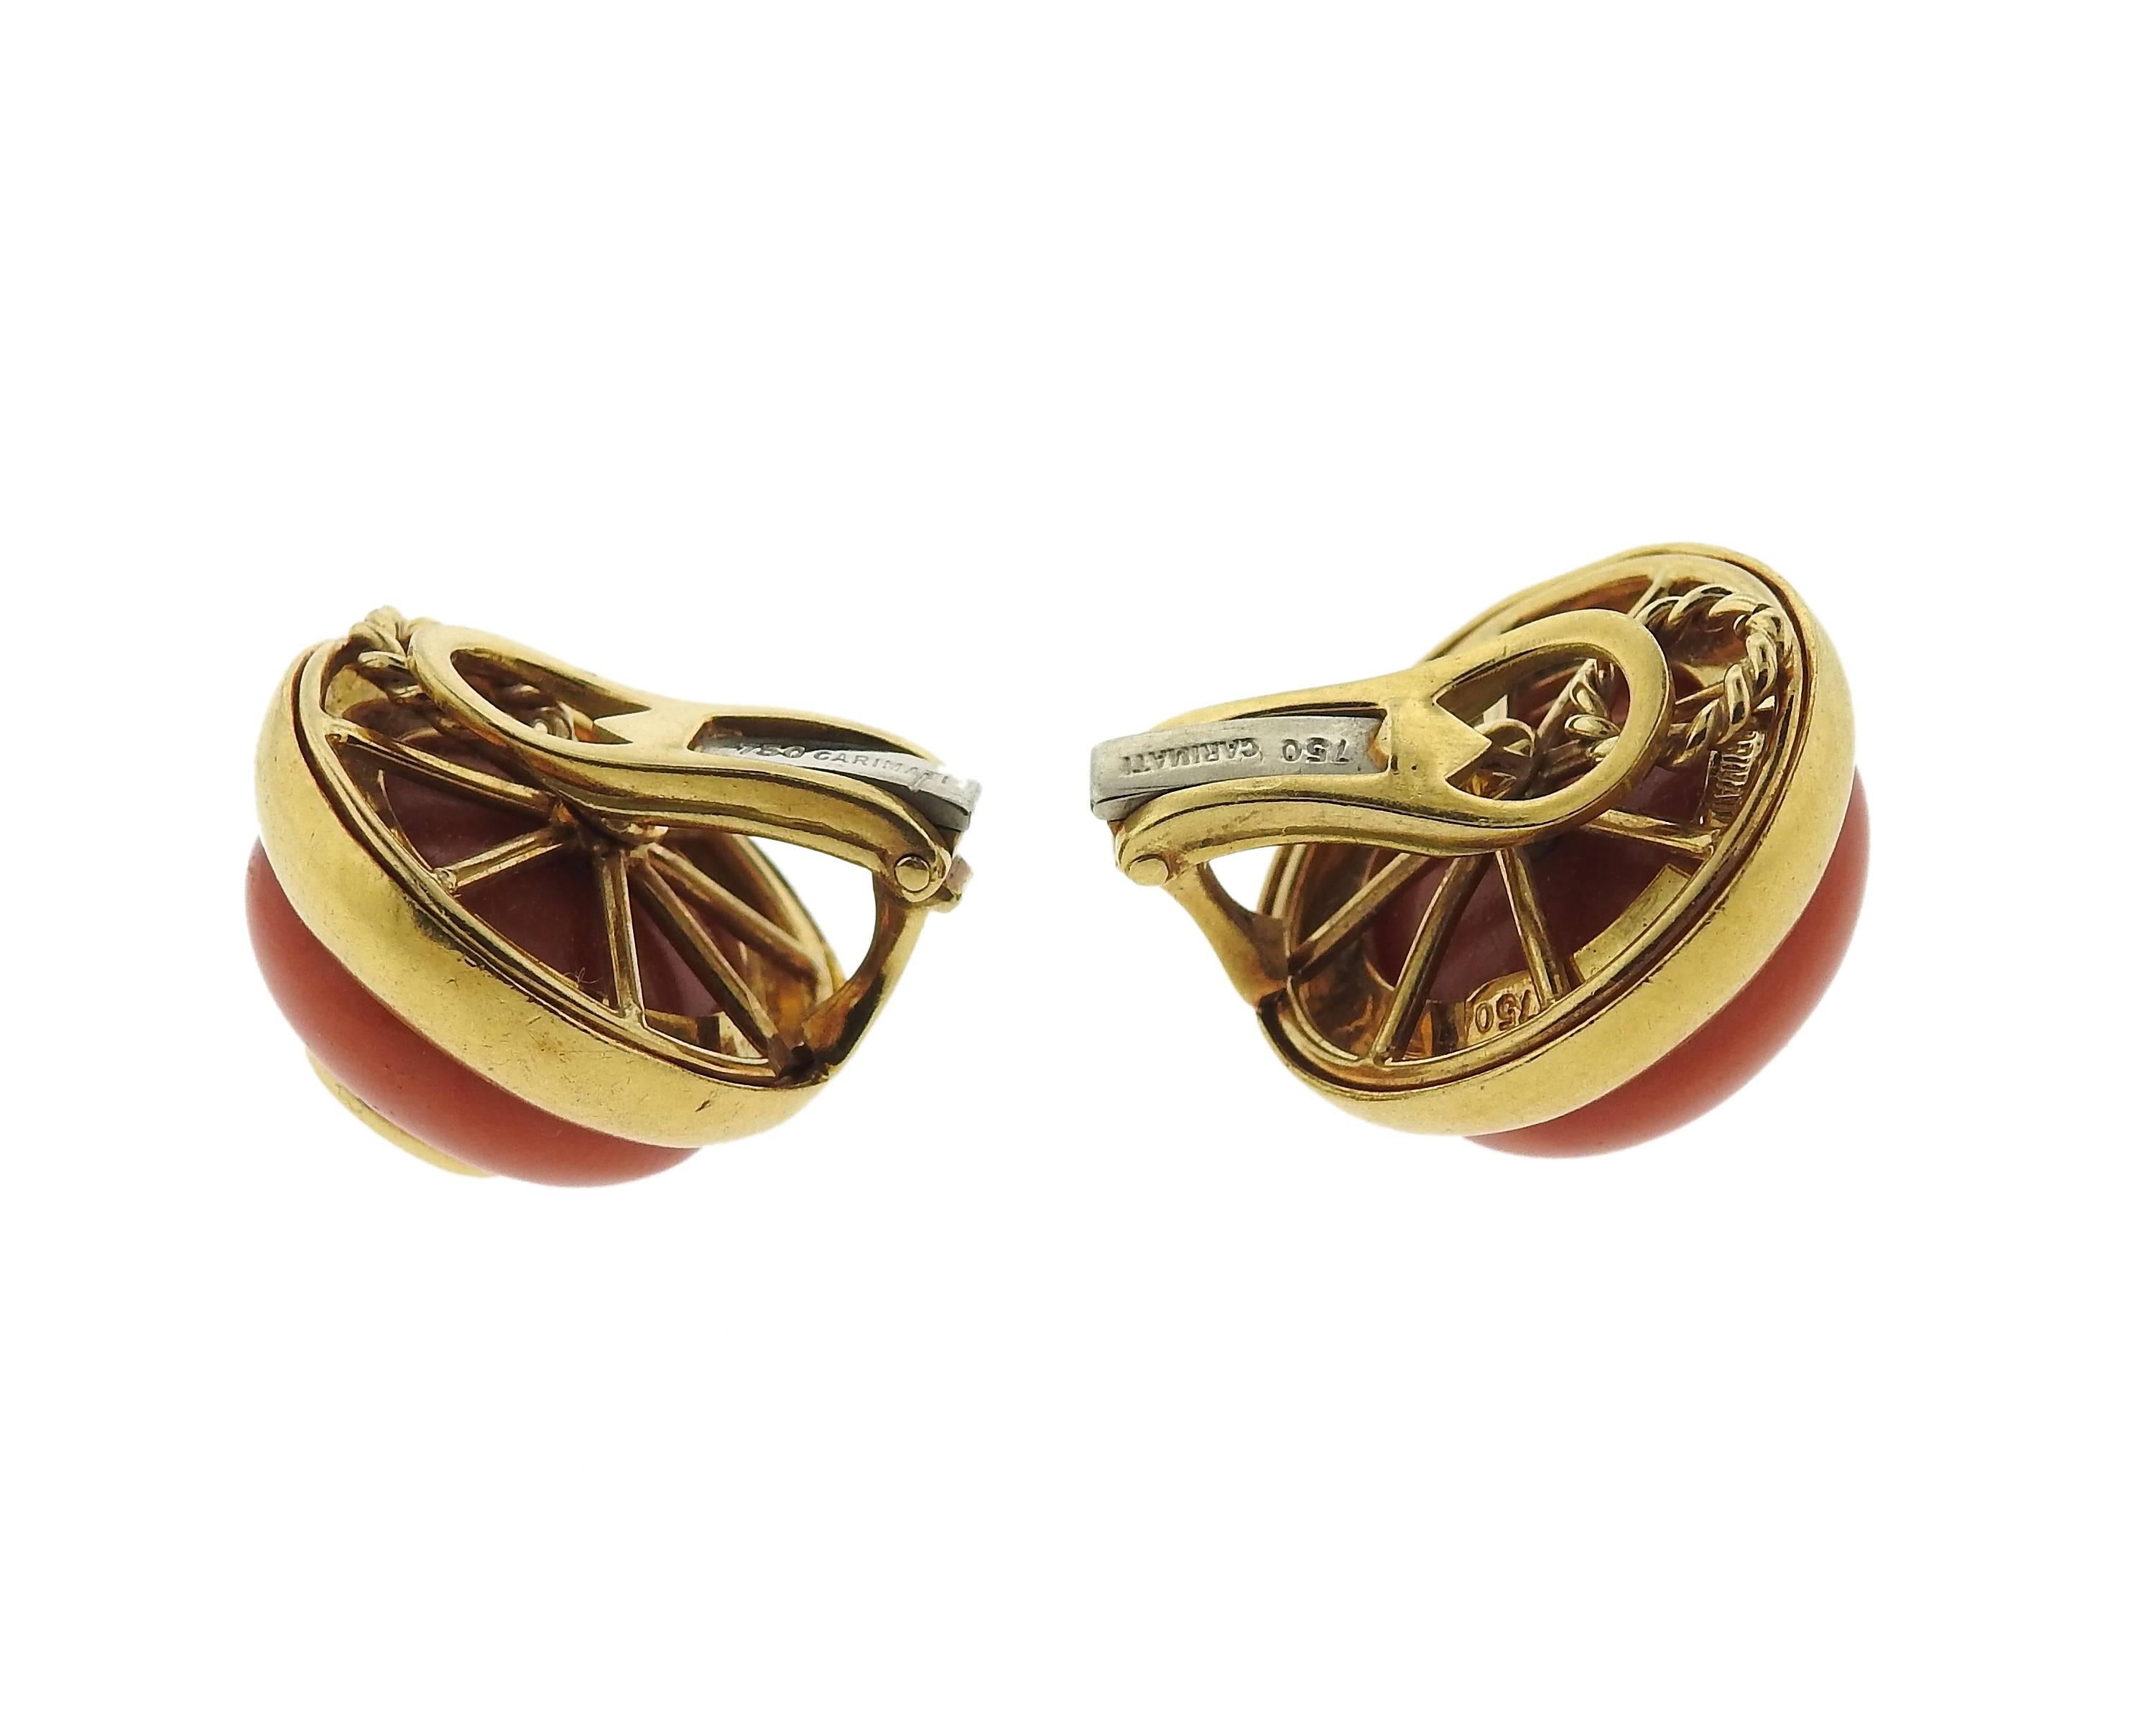 Pair of 18k yellow gold button earrings, crafted by Carimati, set with corals and citrine in the center. Earrings measure 19mm in diameter. Marked: Carimati 750. Weight - 28.1 grams